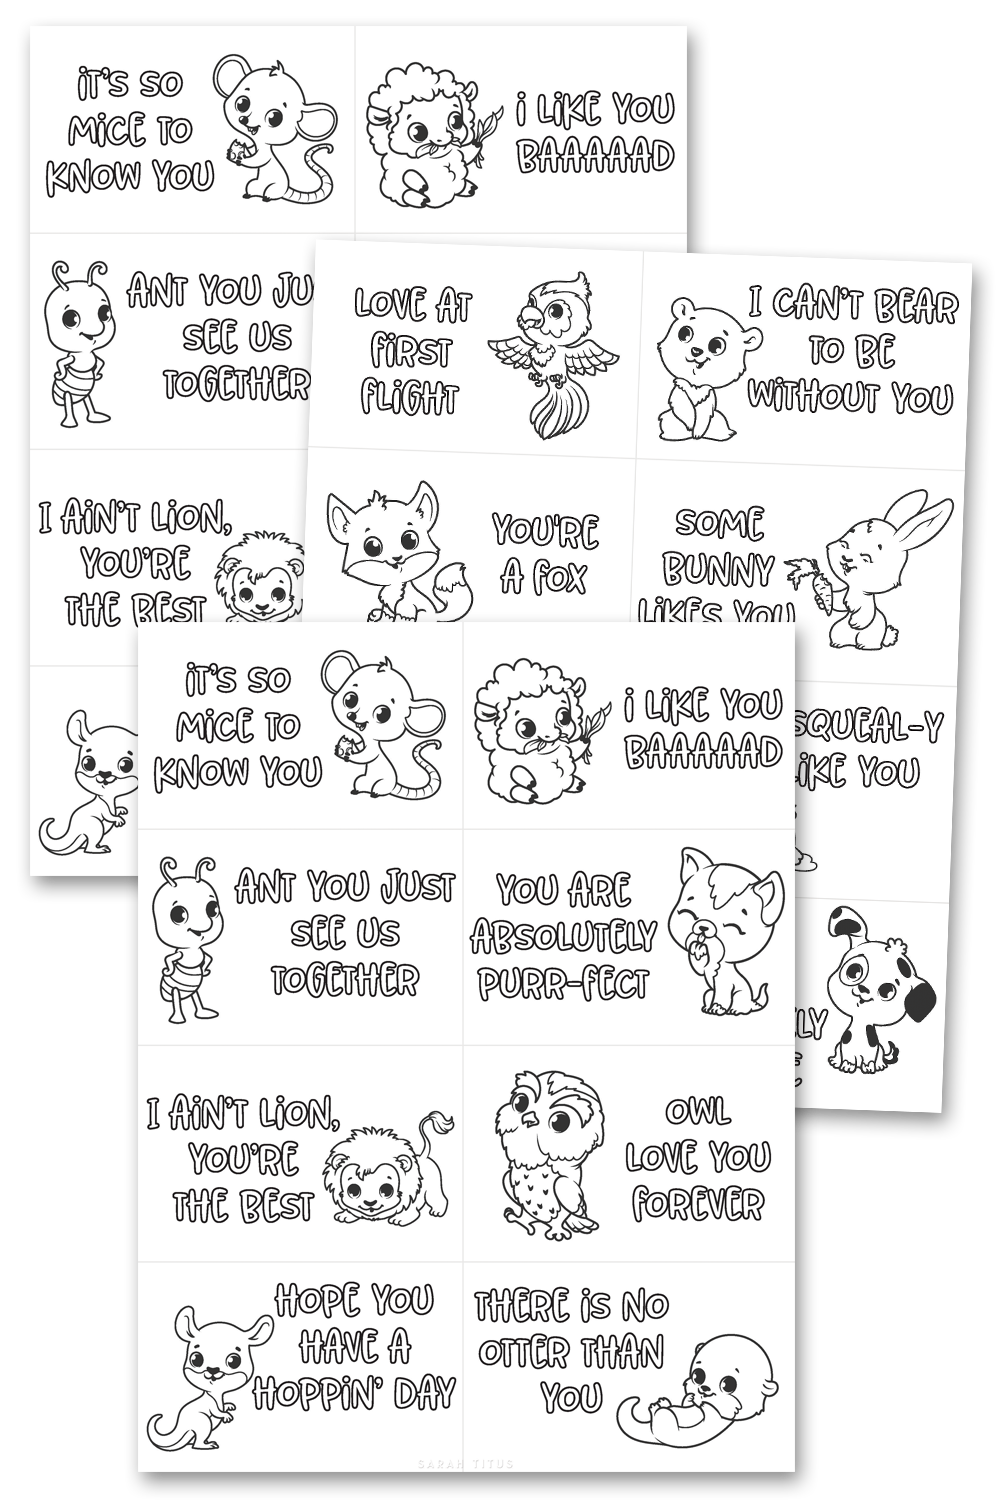 Colorable Animal Pun Valentine's Day CardsColorable Animal Pun Valentine's Day Cards